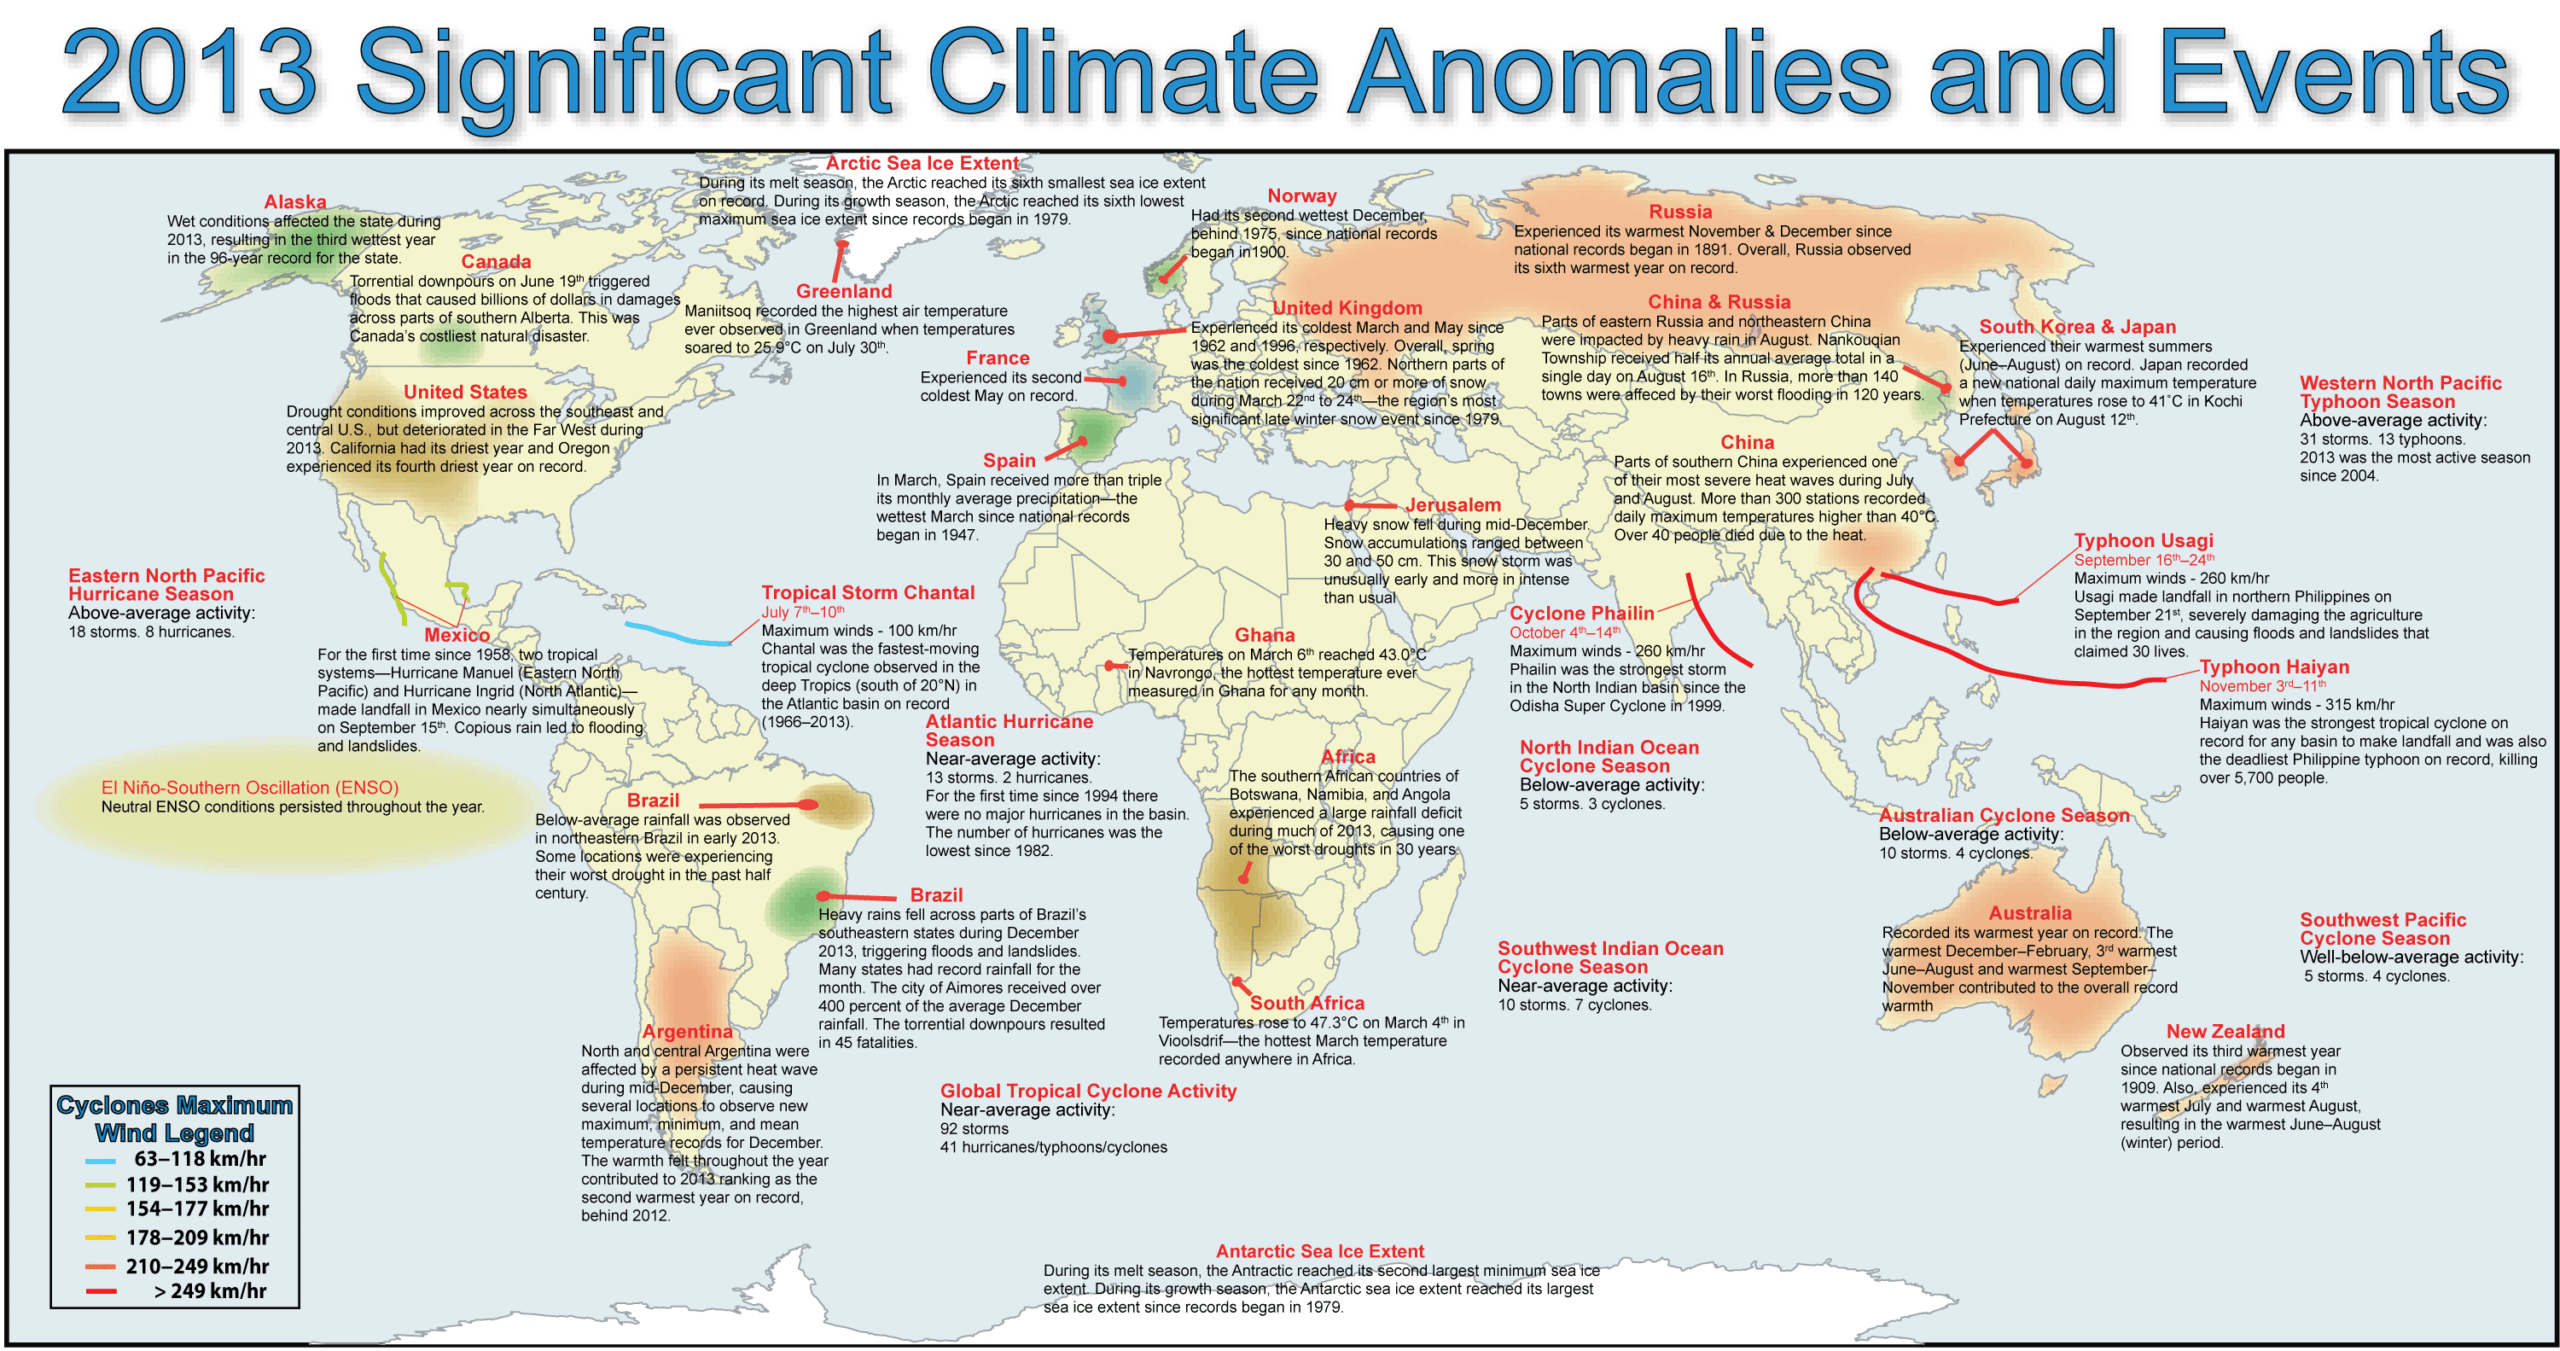 2013 Significant Climate Anomalies and Events